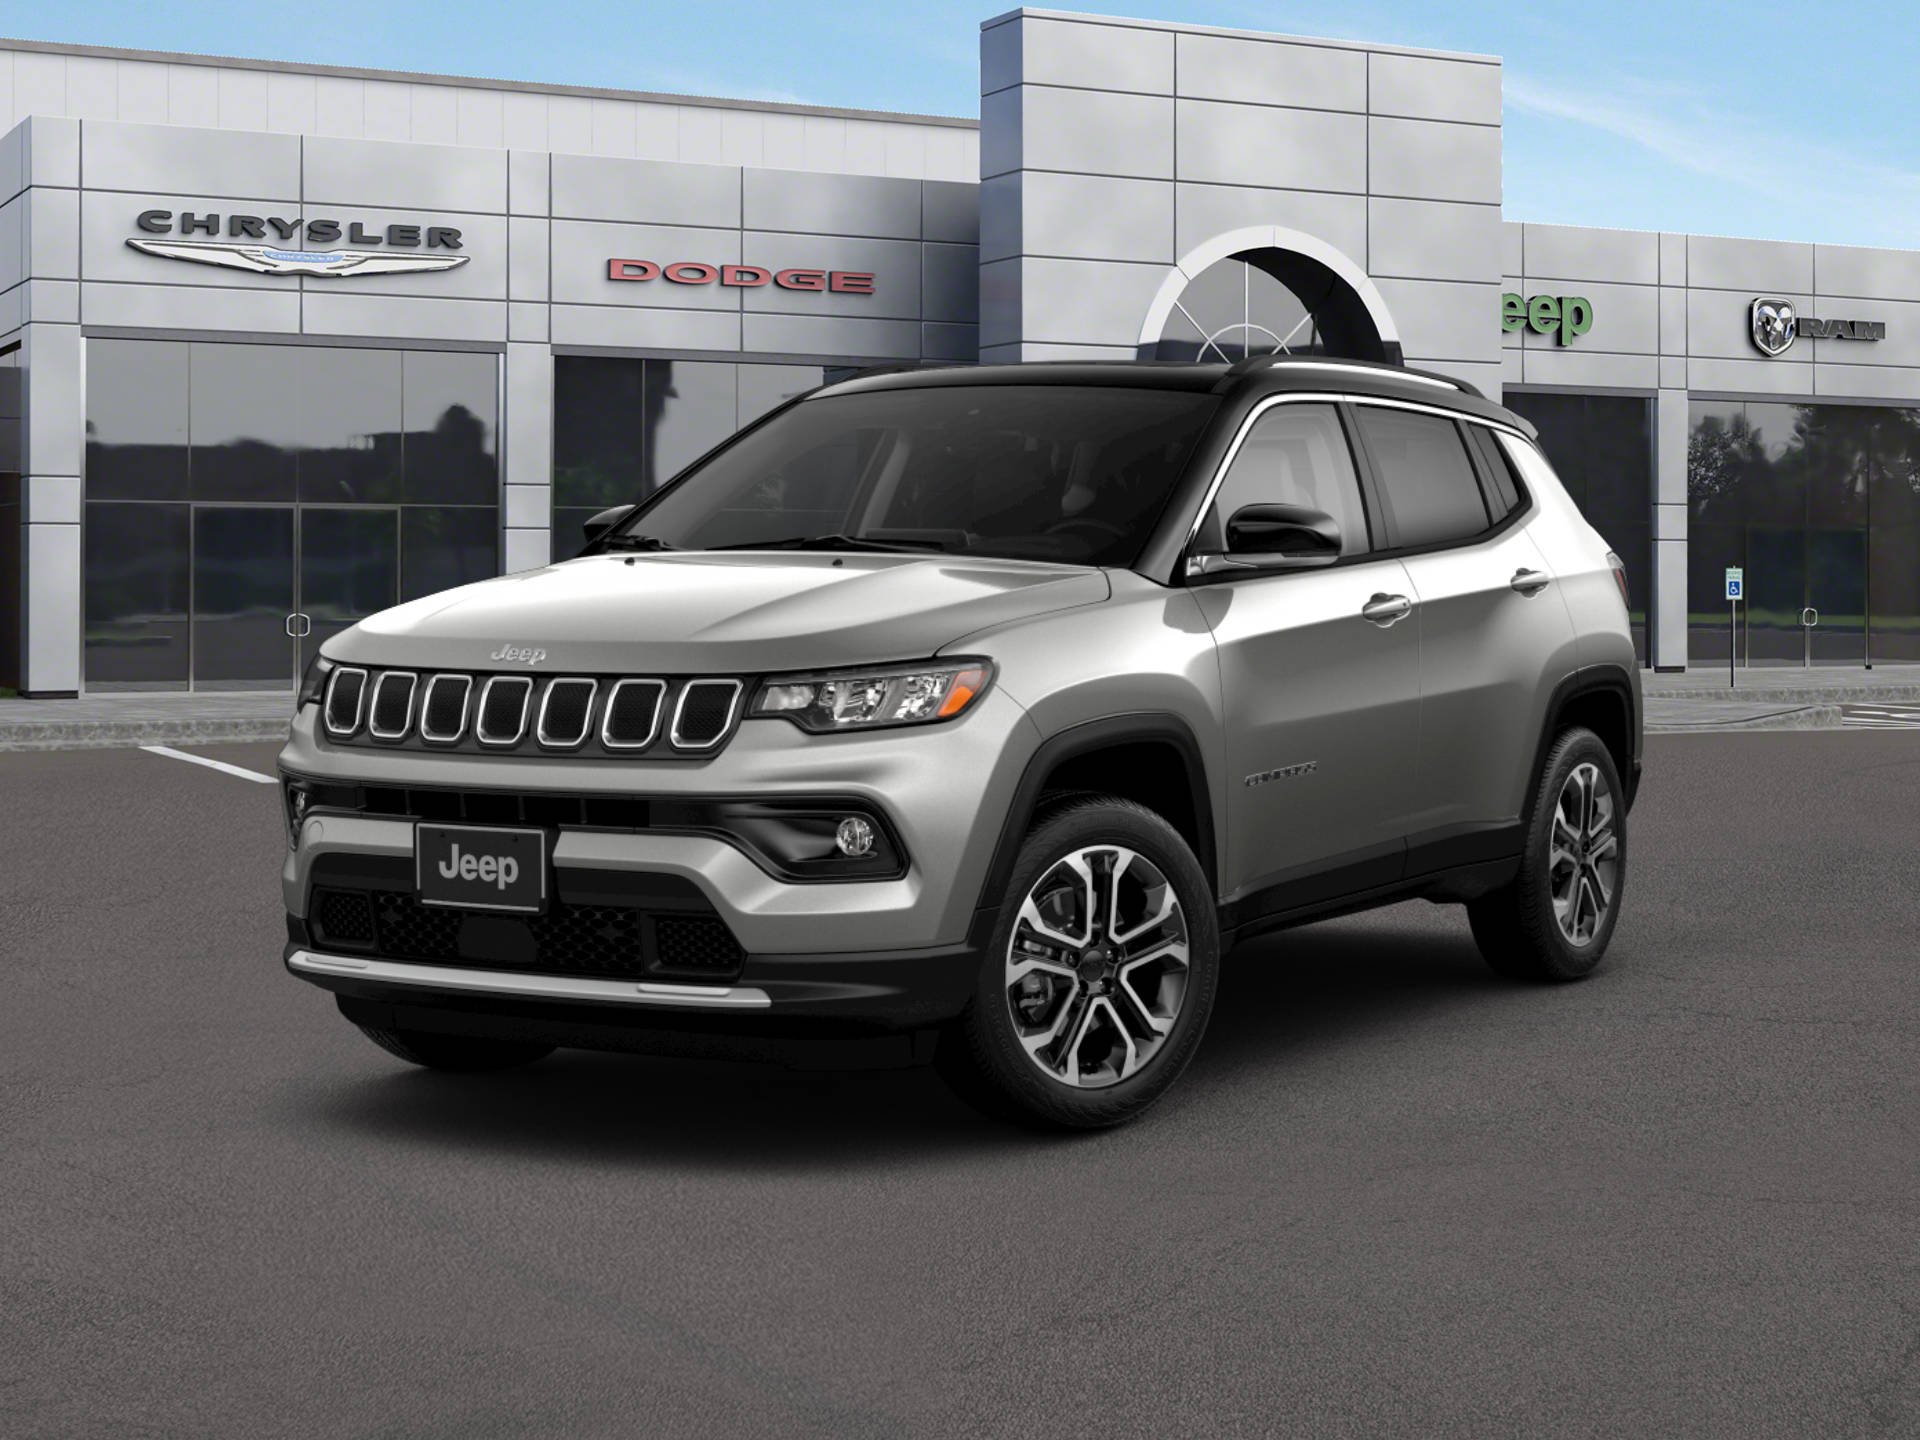 Jeep Compass Silver Aesthetic Outside Building Wallpaper